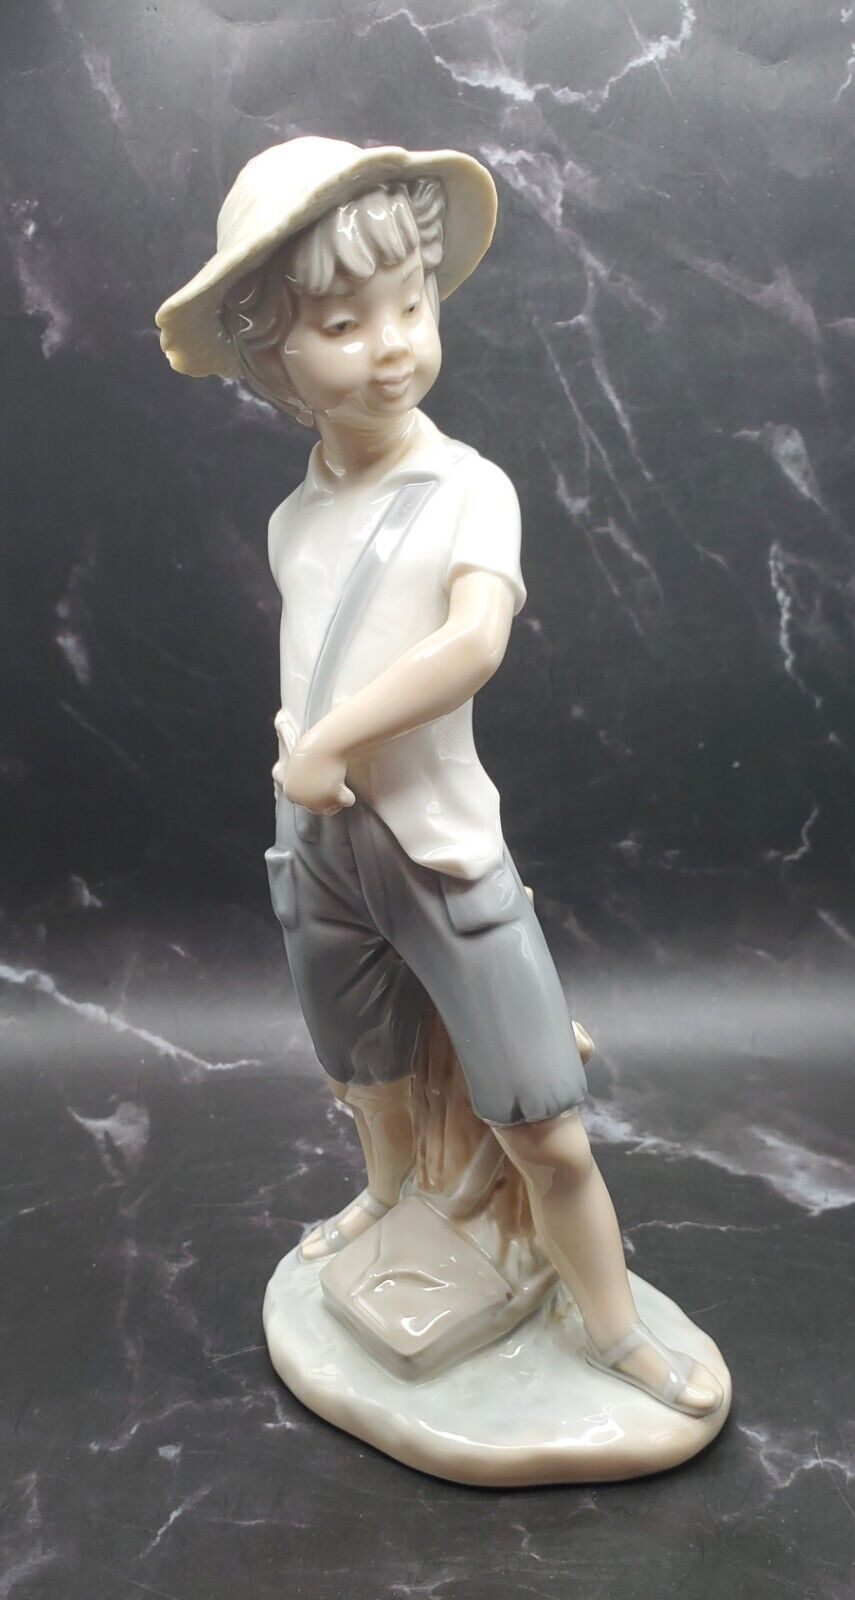 VTG 1980's NAO by Lladro Boy w/Sling Shot Porcelain Figurine made in Spain